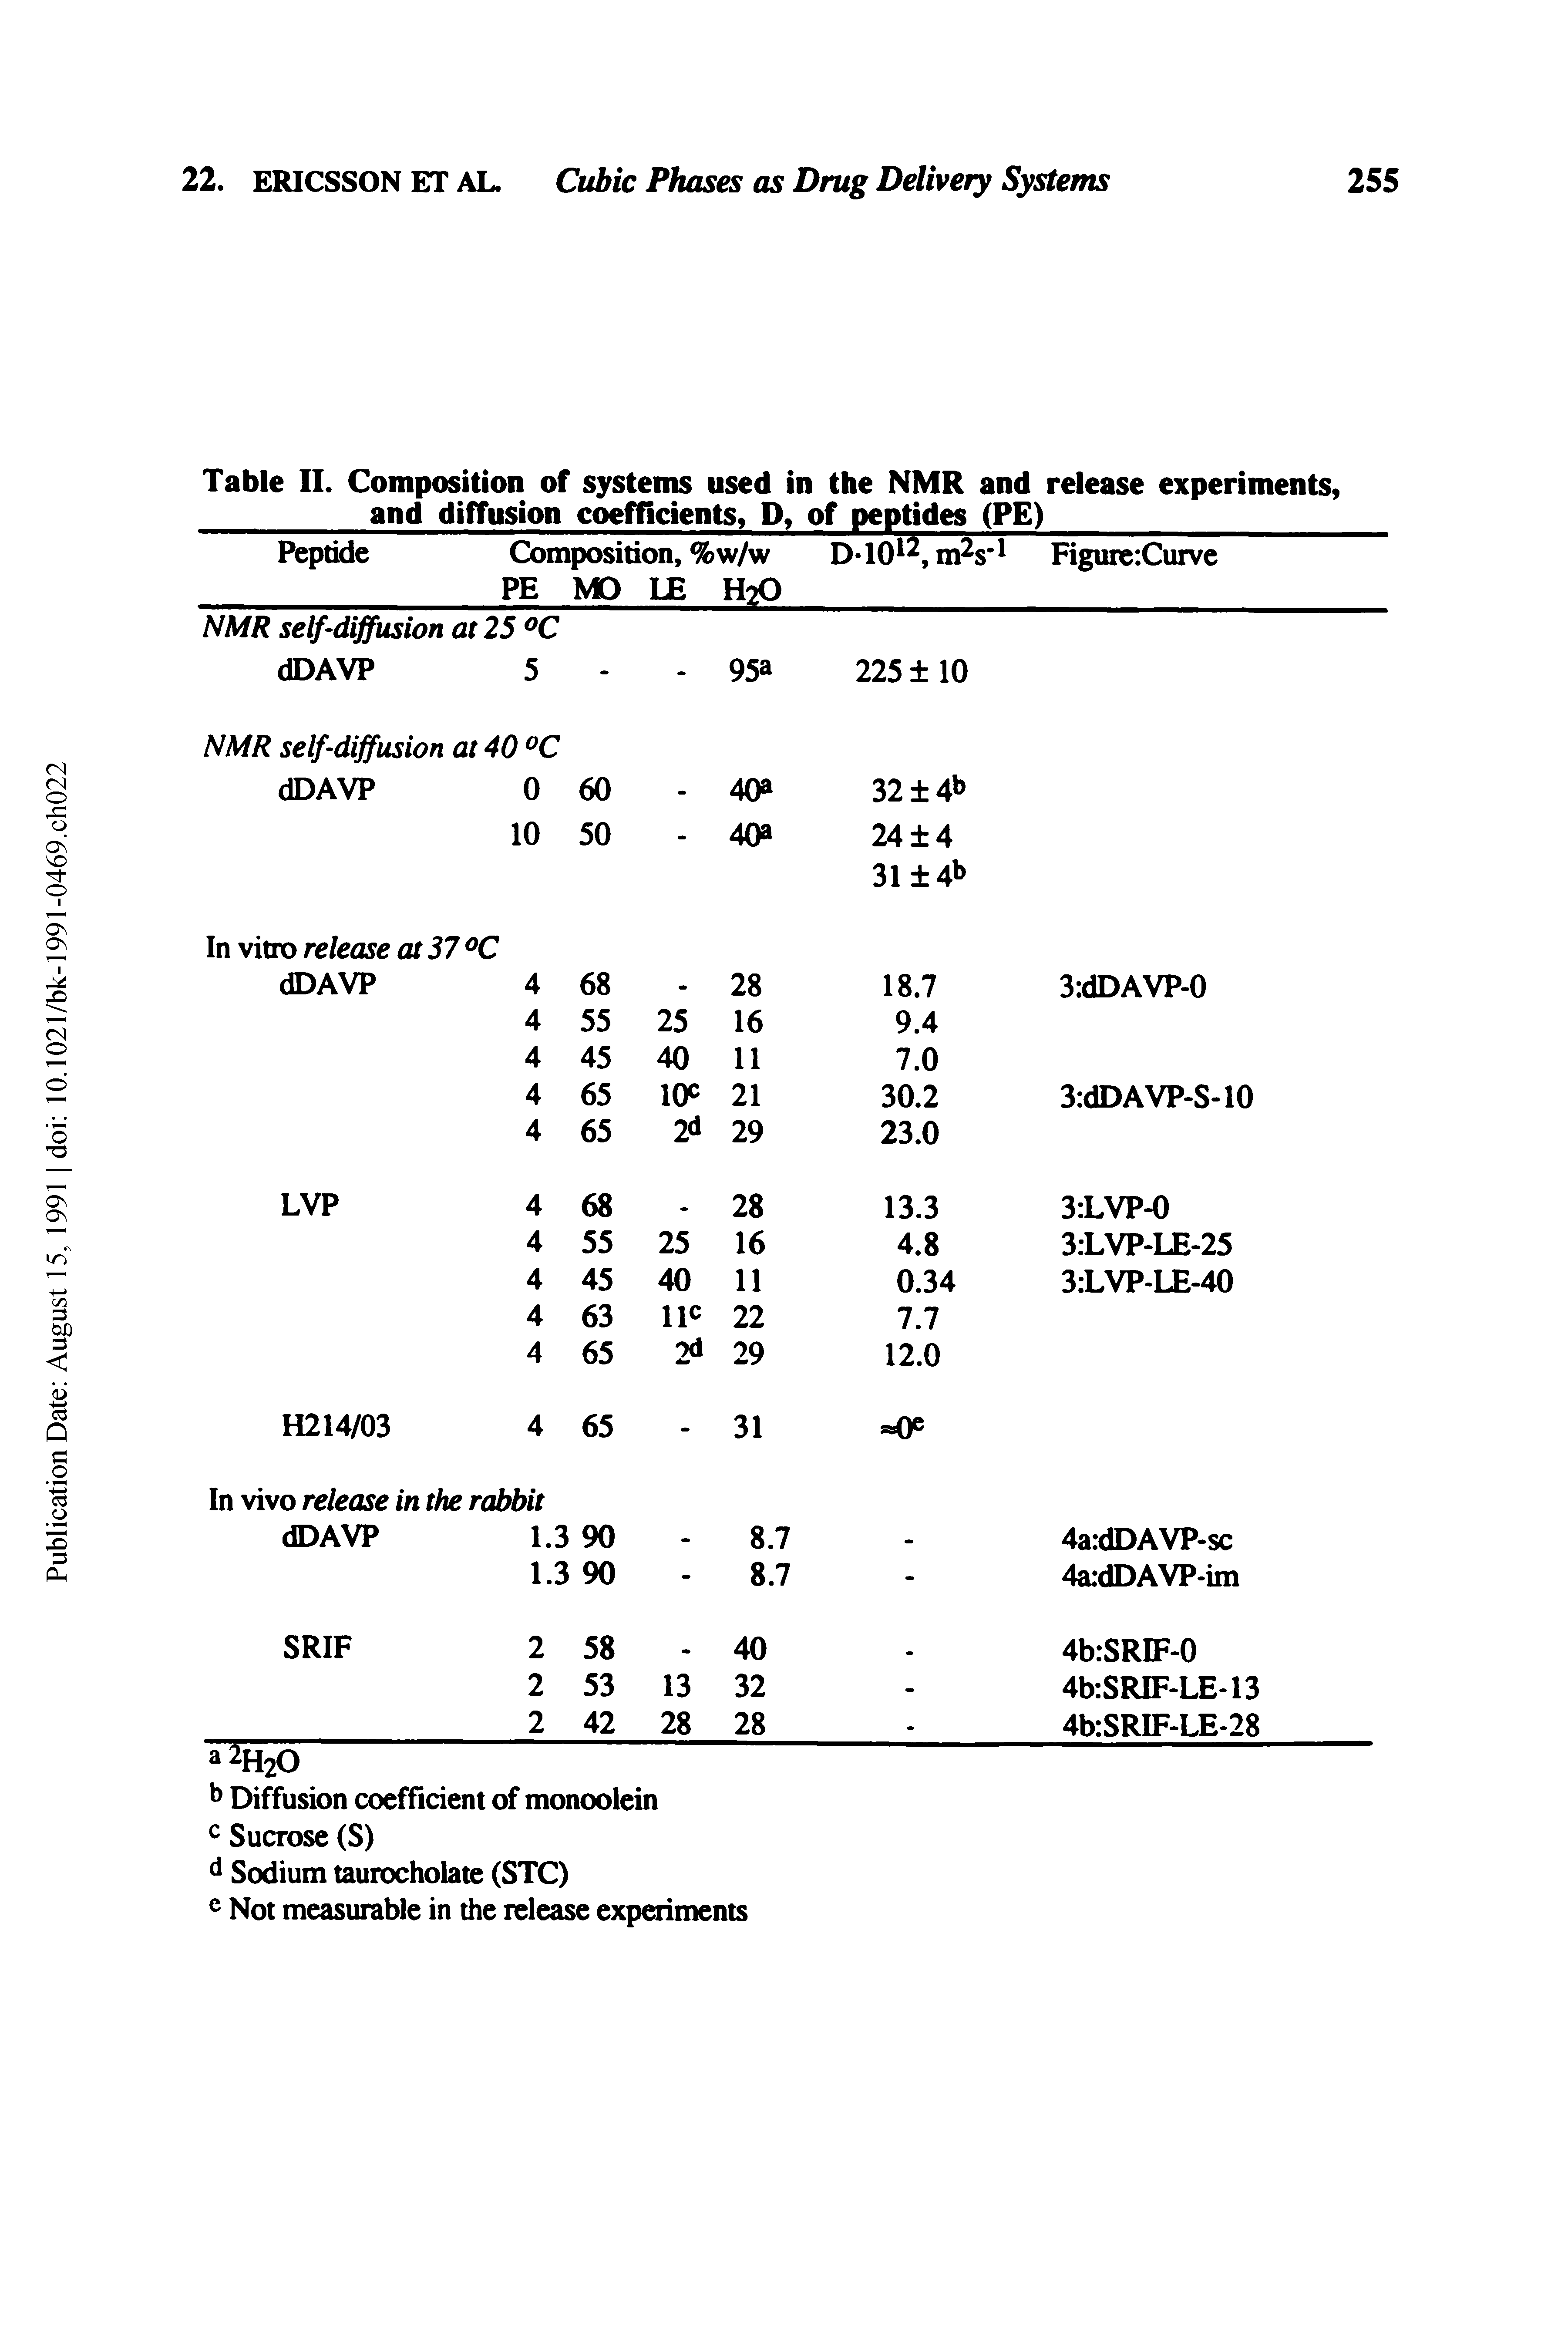 Table II. Composition of systems used in the NMR and release experiments,...